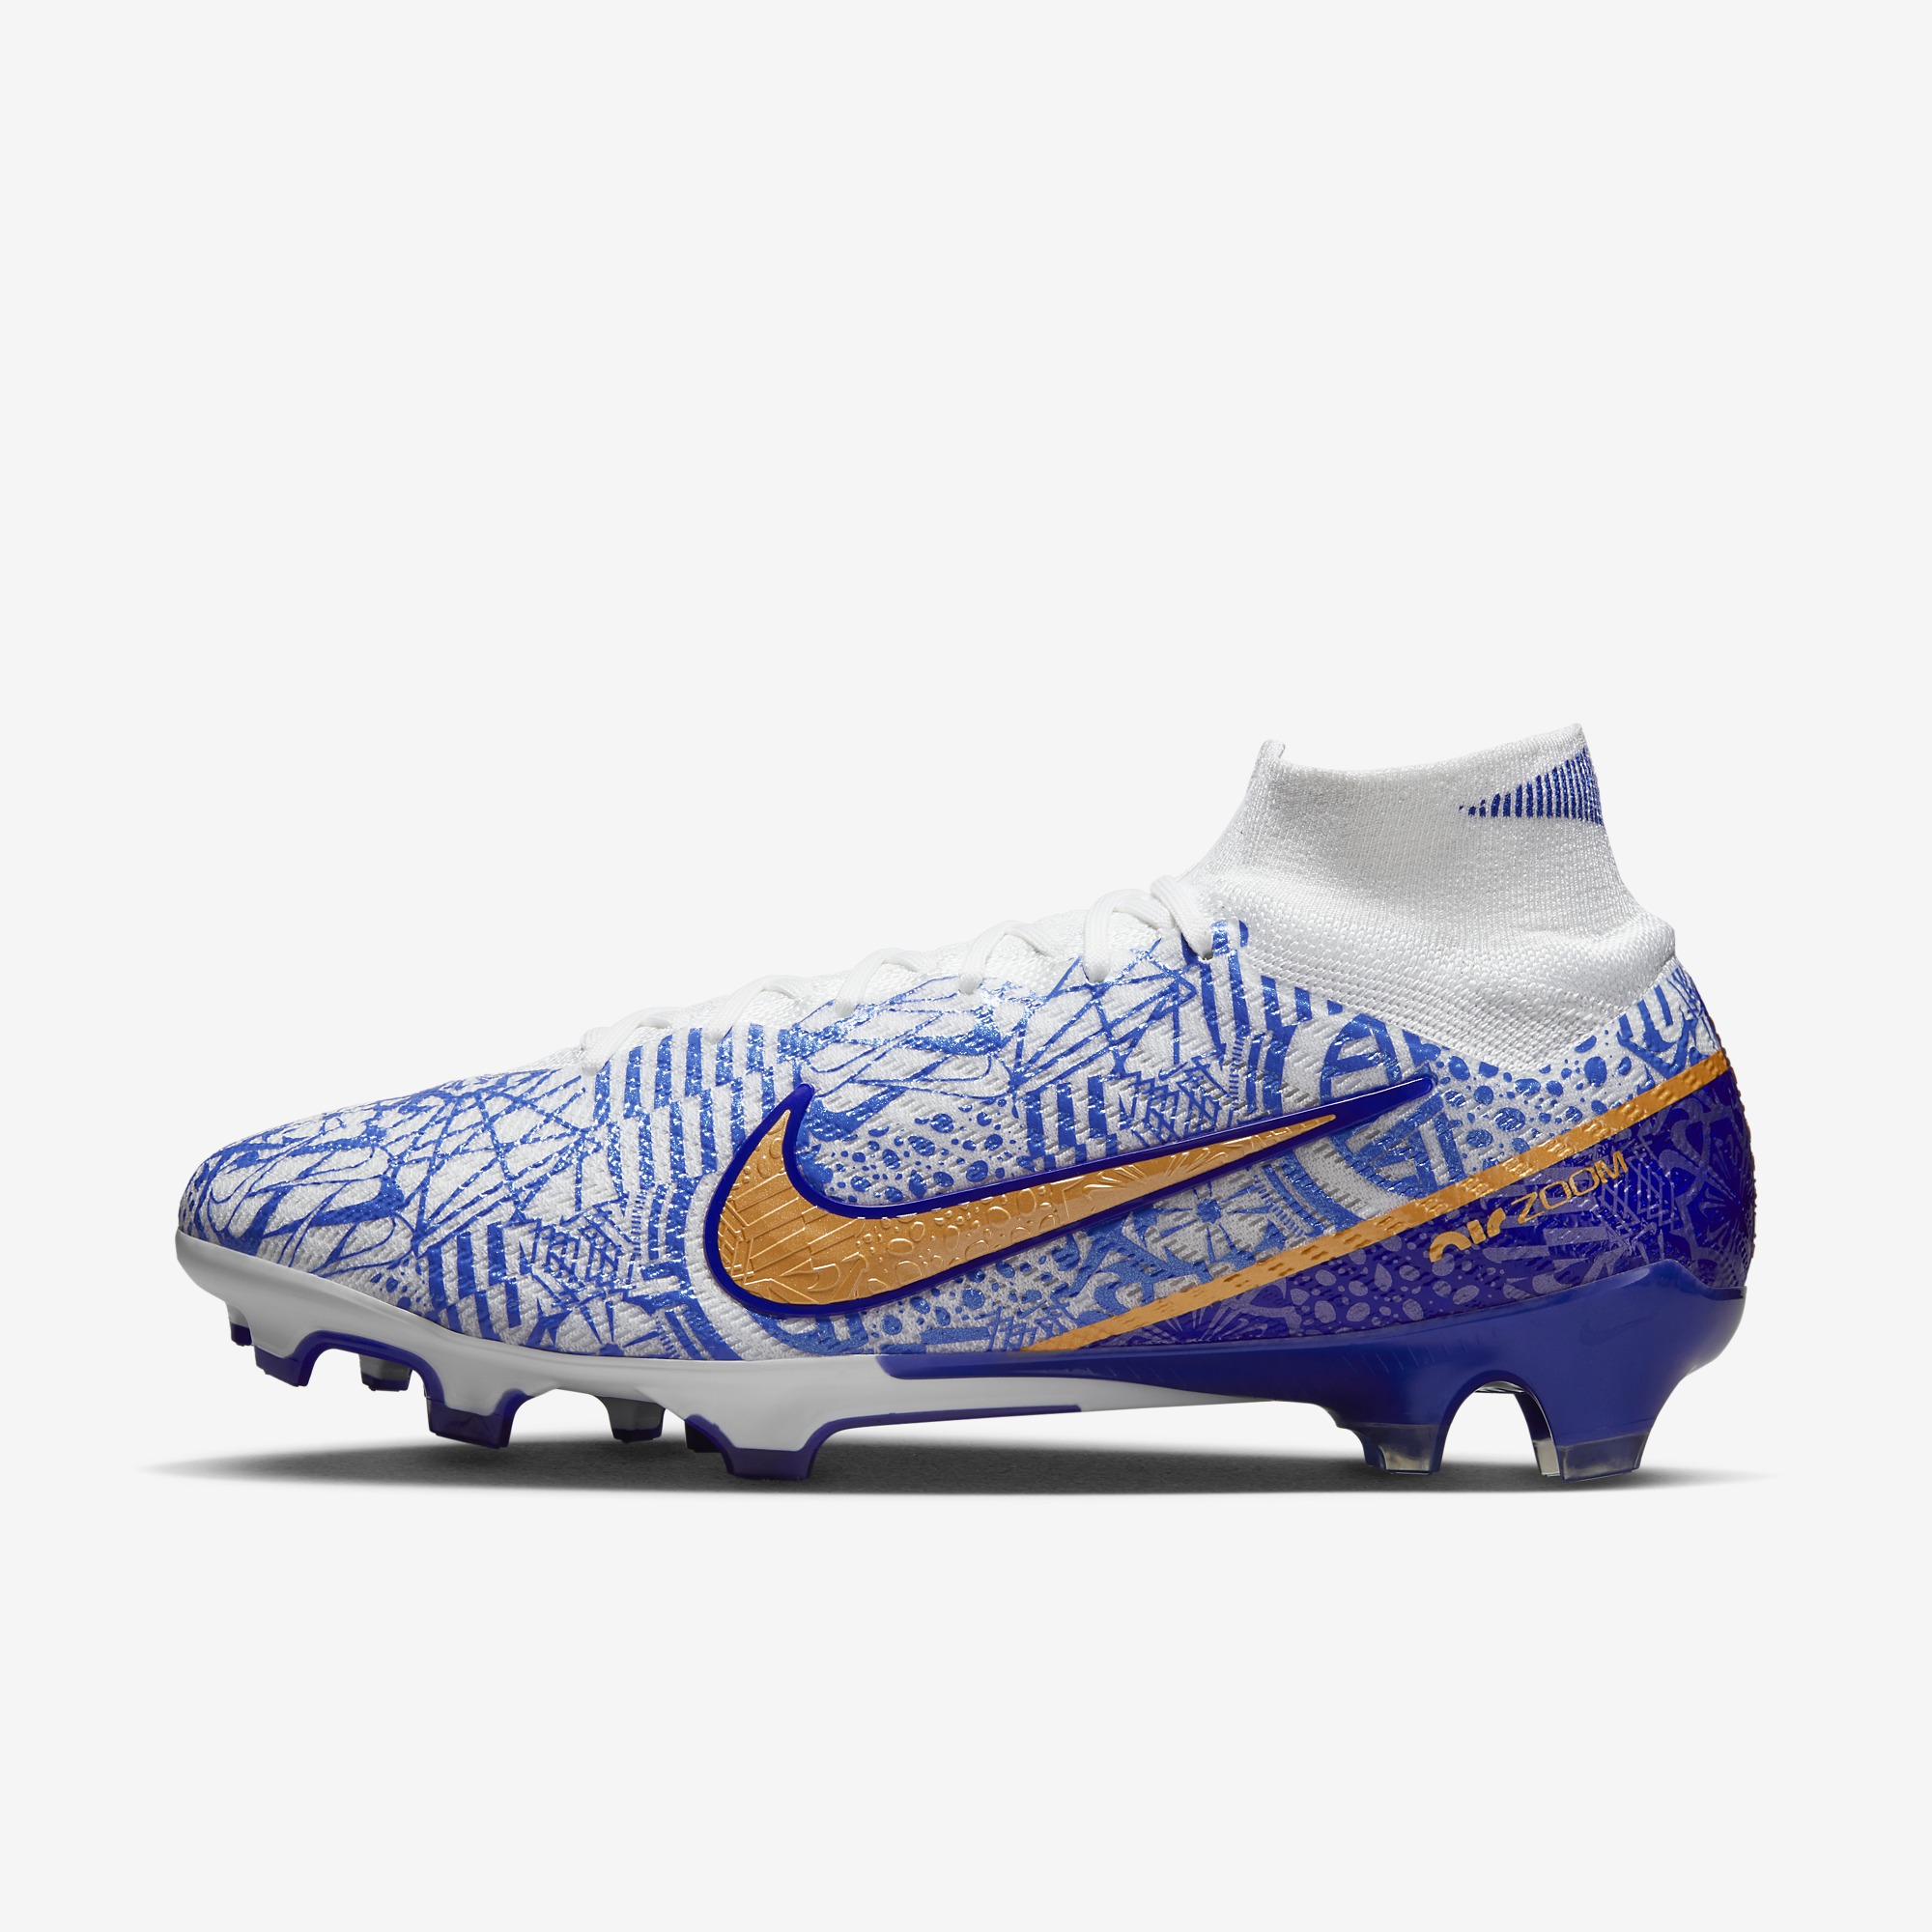 stefanssoccer.com:Nike Zoom Superfly 9 Elite CR7 Firm Ground Soccer Cleats  - White / Royal